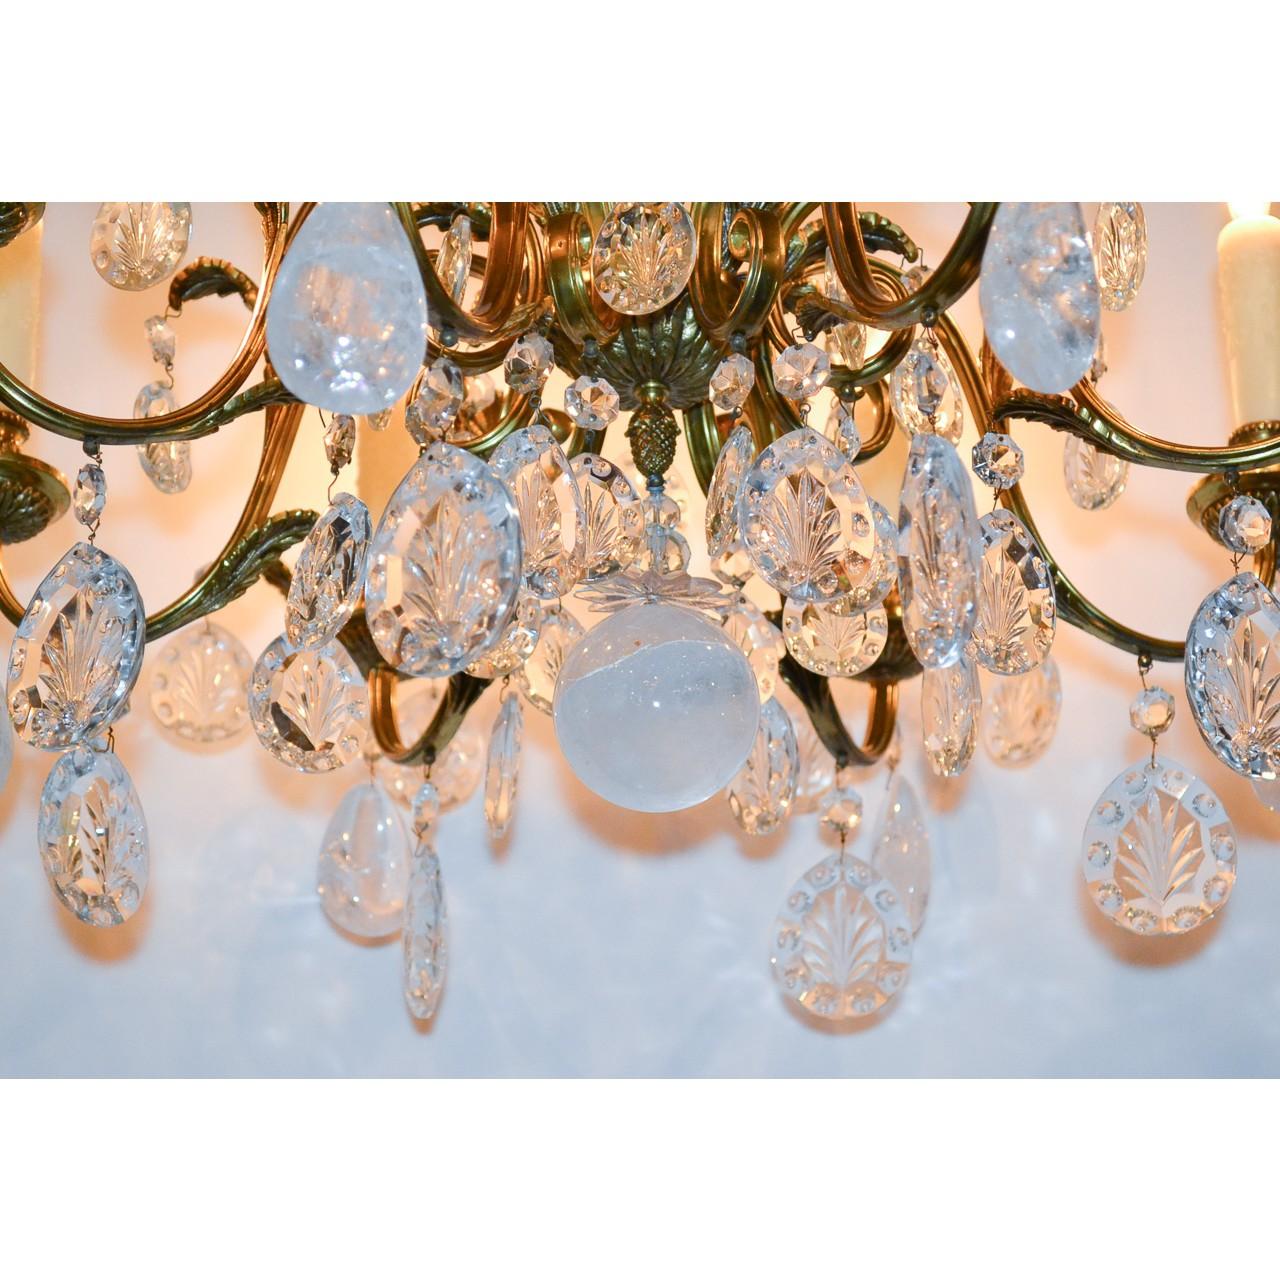 Exquisite early 20th century French gold-gilded bronze chandelier with superb contrasting cut crystals and polished rock crystal. The leaf spray crown adorned with cut and faceted crystal prisms atop a ribbed and fluted shaped stem. Mounted with